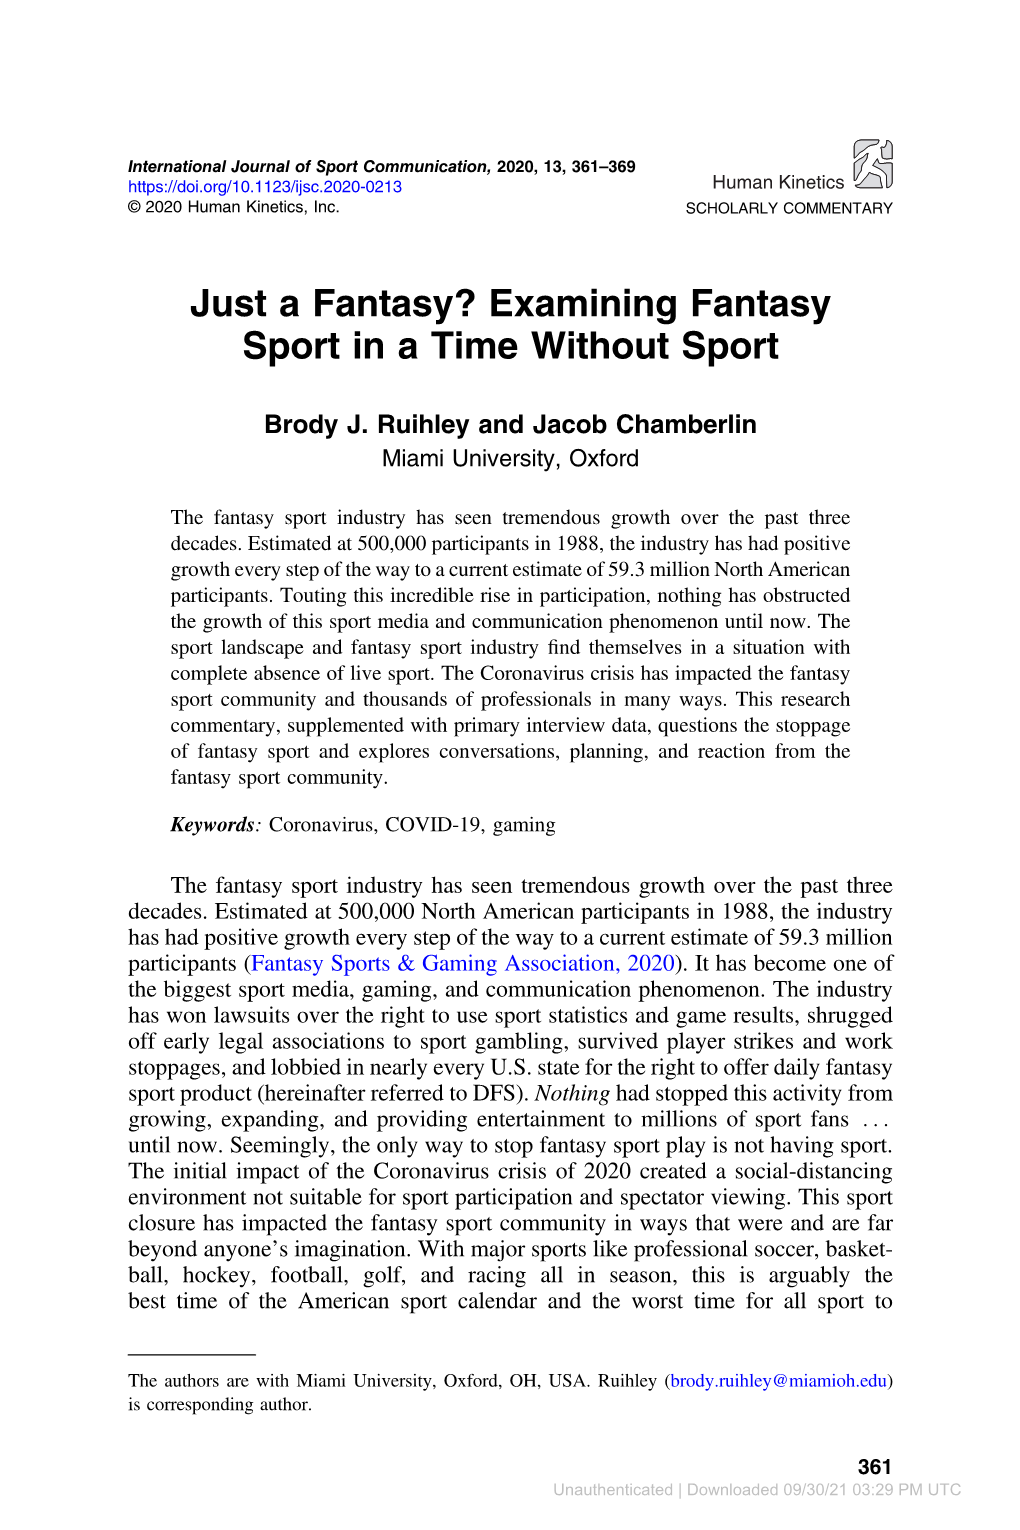 Examining Fantasy Sport in a Time Without Sport